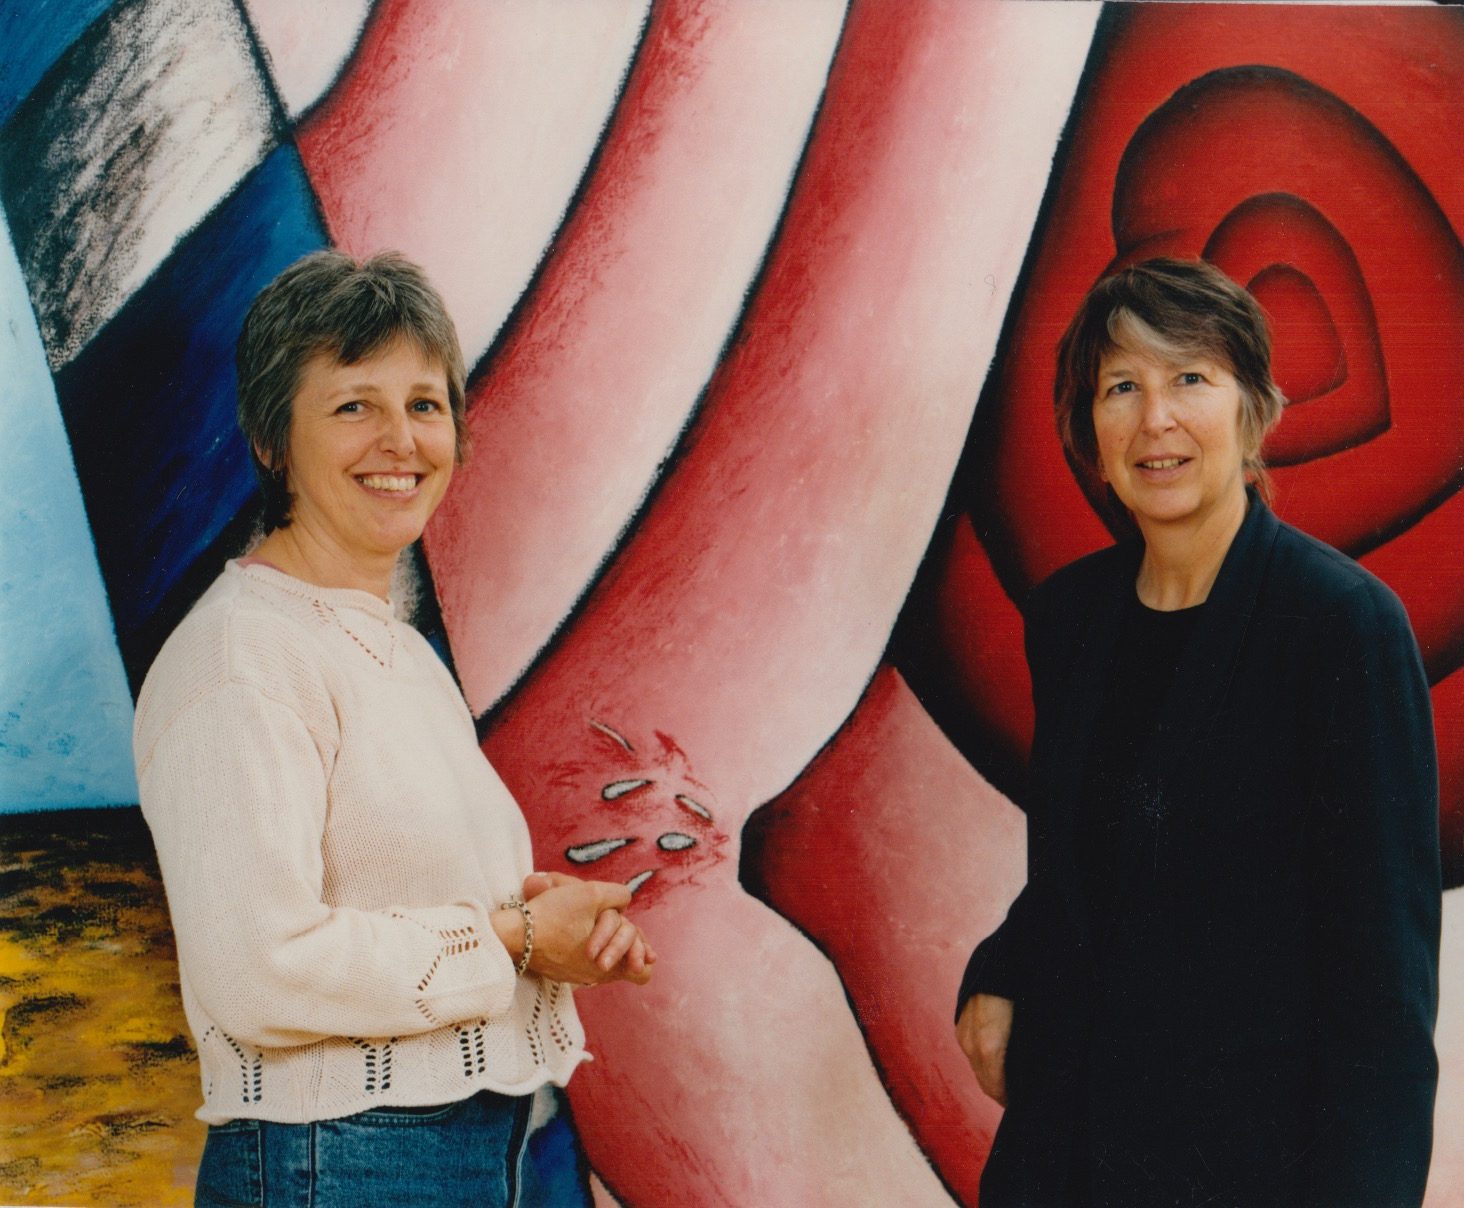 Professors Dawn Ades and Valerie Fraser with artwork from ESCALA